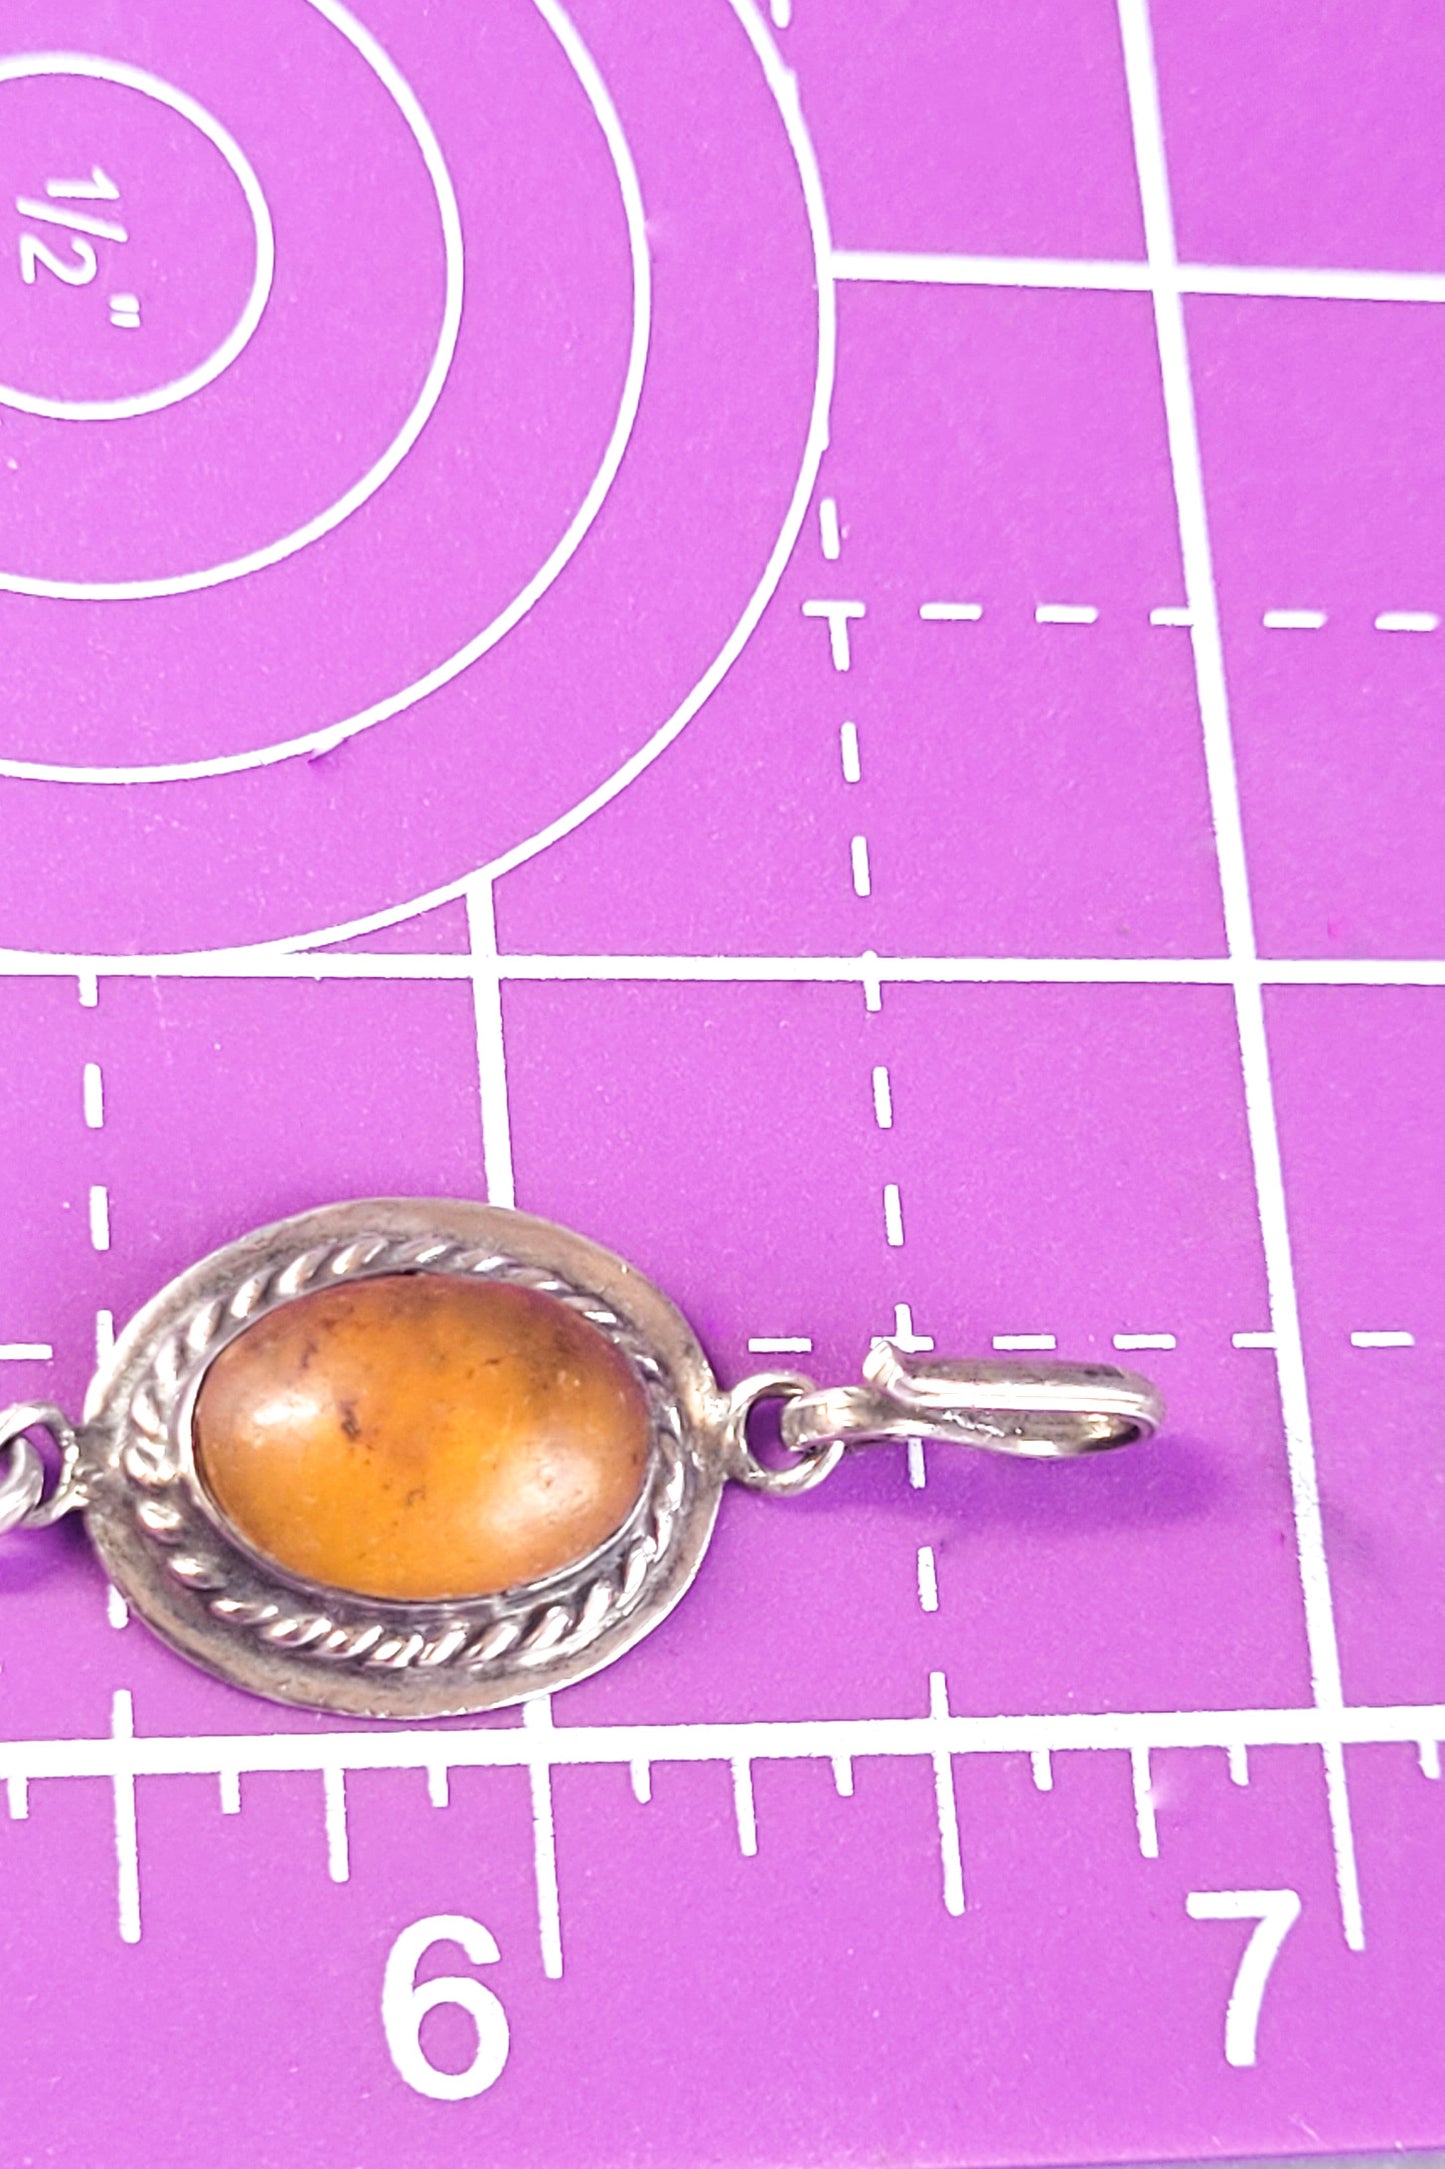 Baltic Amber with inclusions 5 panel vintage sterling silver tennis bracelet 925